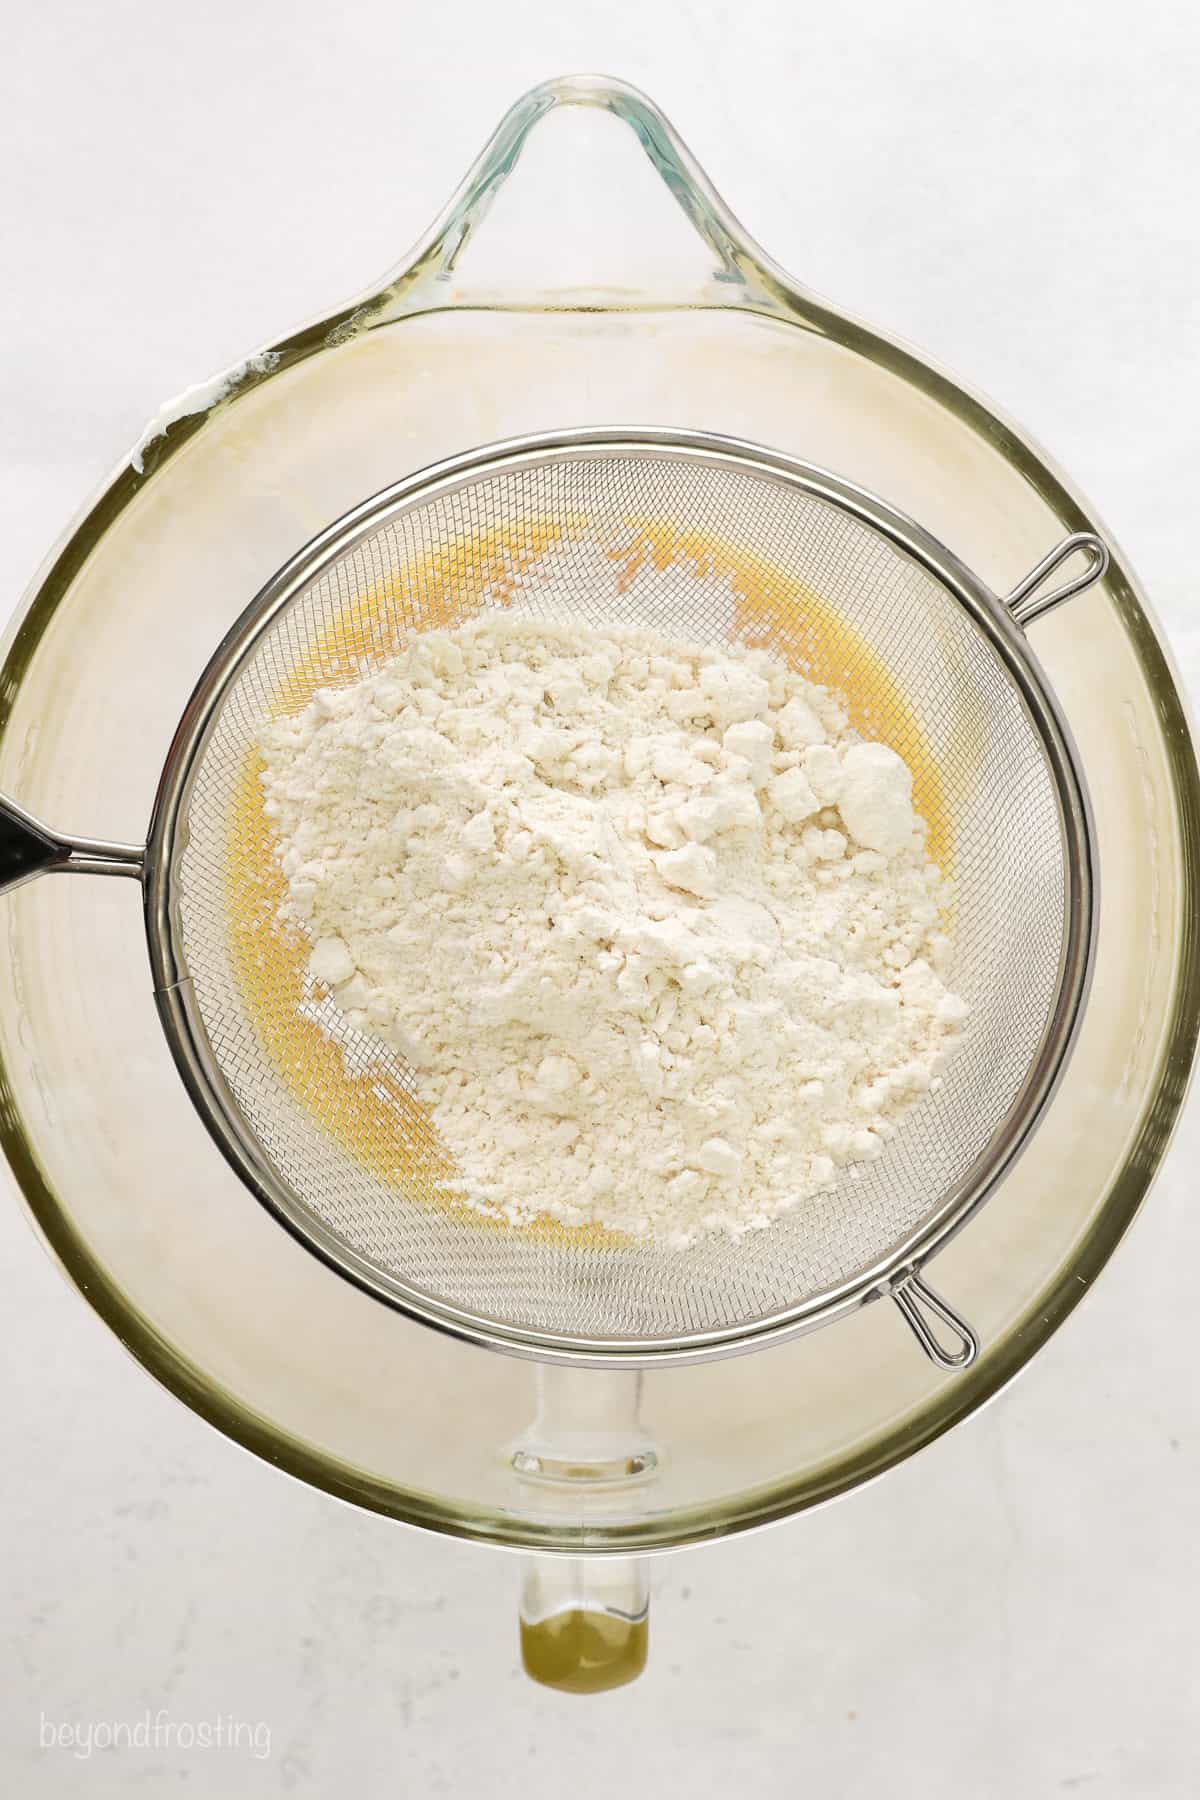 Dry ingredients added to wet cupcake batter in a glass bowl.